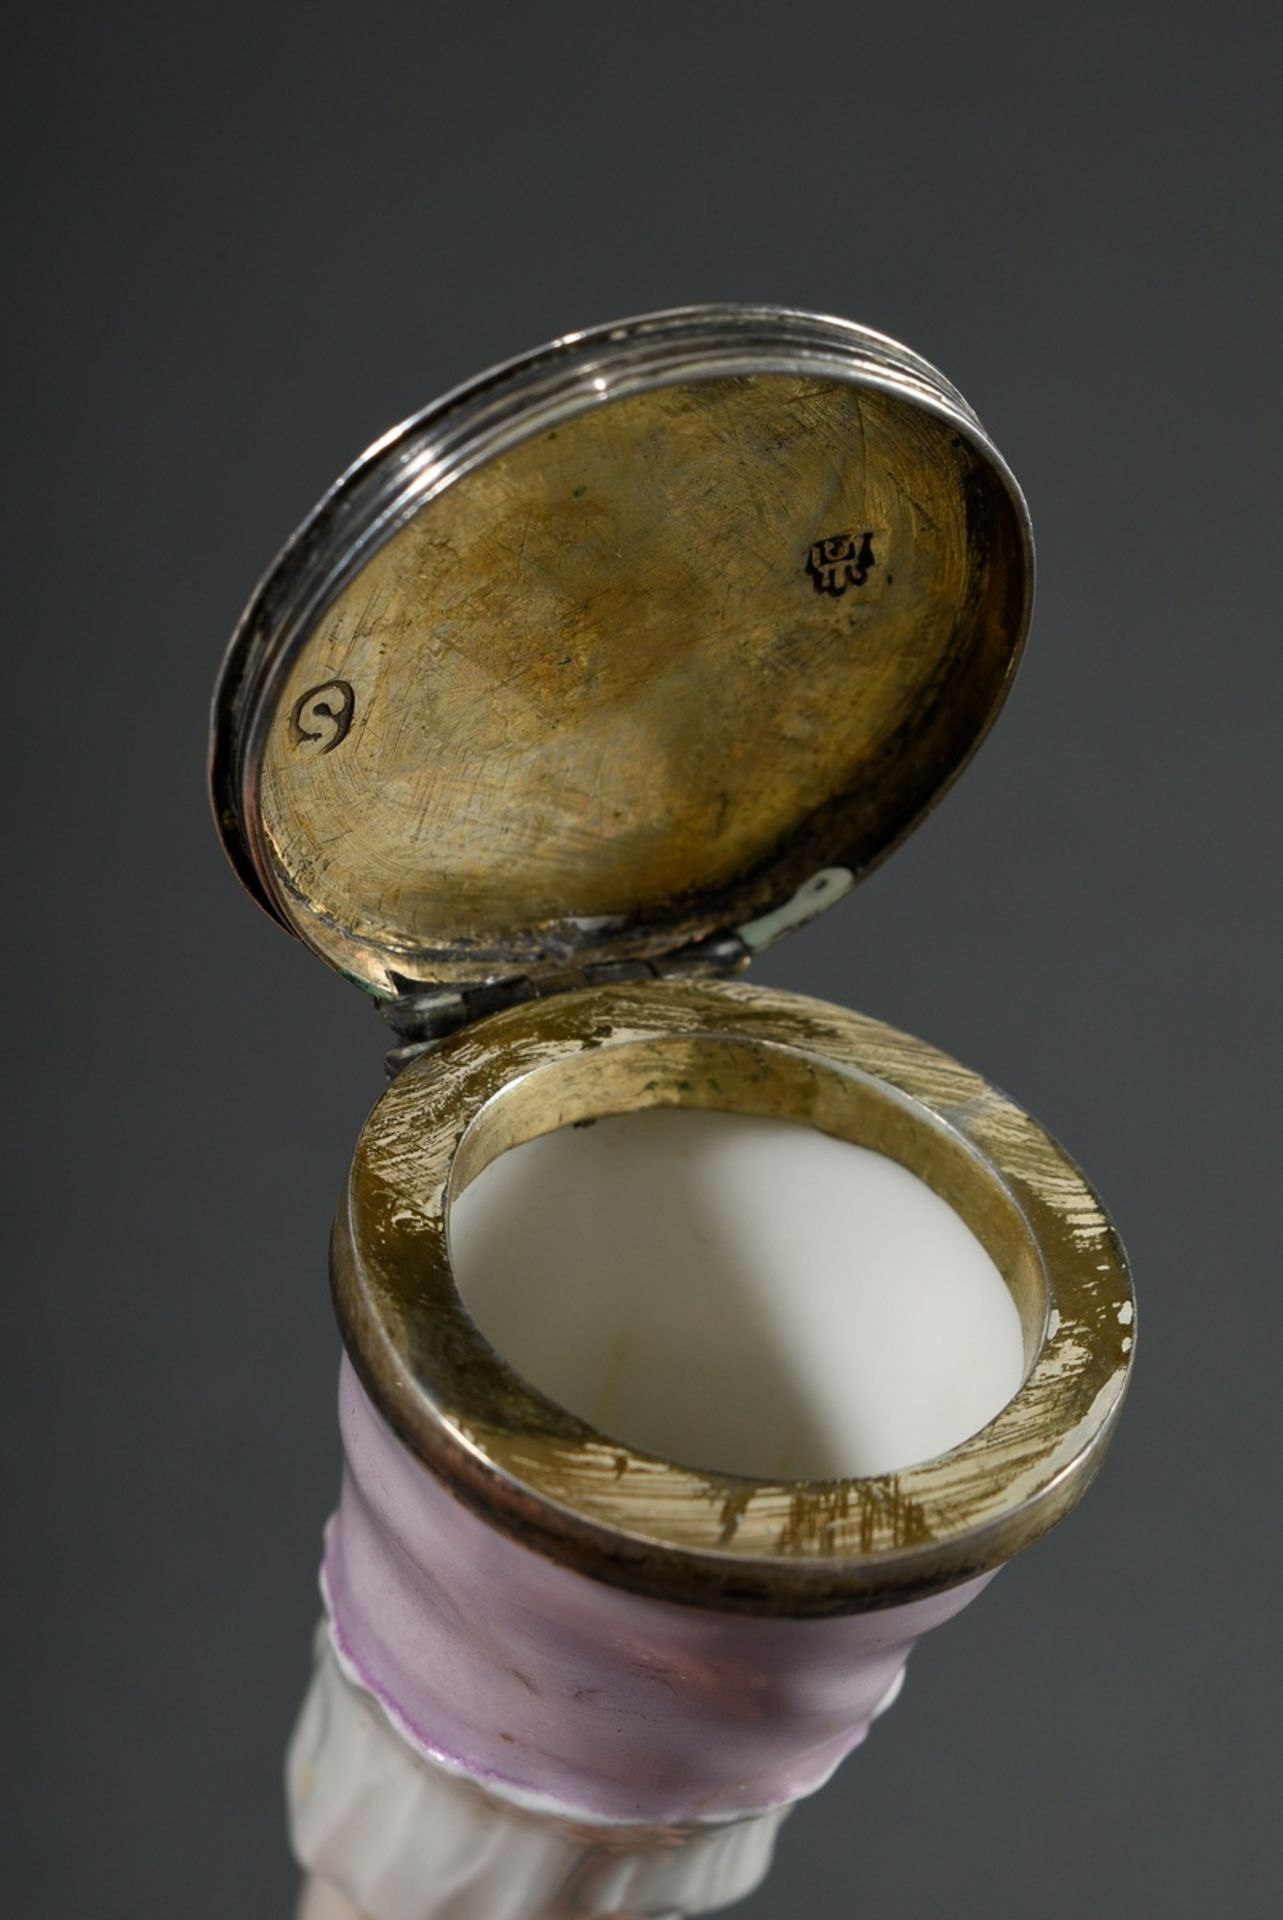 Porcelain perfume box or pomander "Lady's hand with cherries" with floral engraved silver mounting, - Image 6 of 7